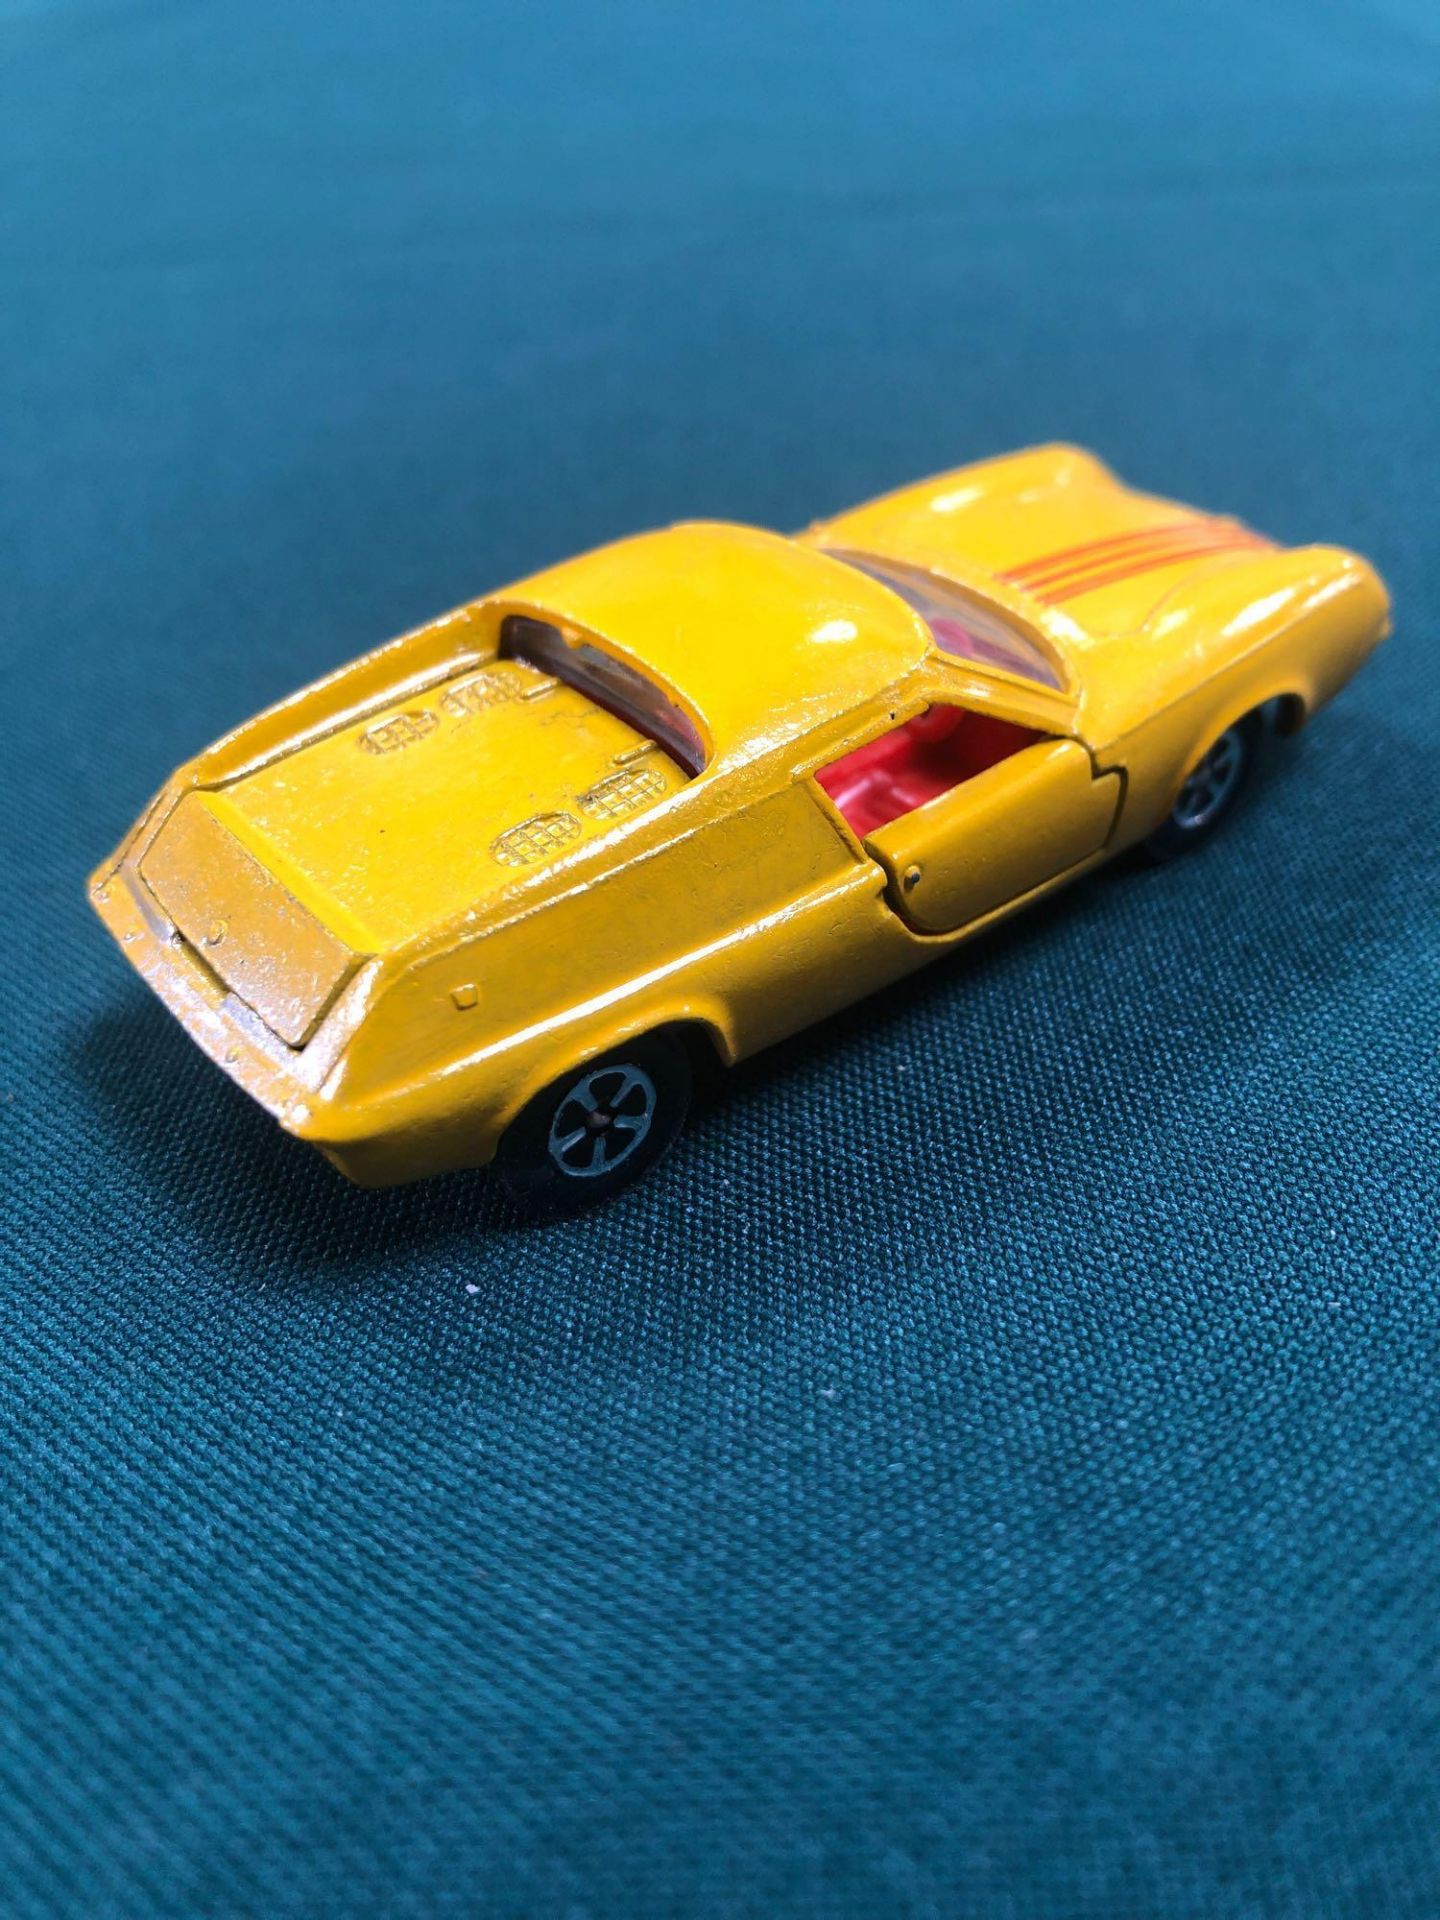 Lone Star Flyers Diecast Model #36 Lotus Europa GT In Yellow With Red Stripe And Red Interior In - Image 3 of 3